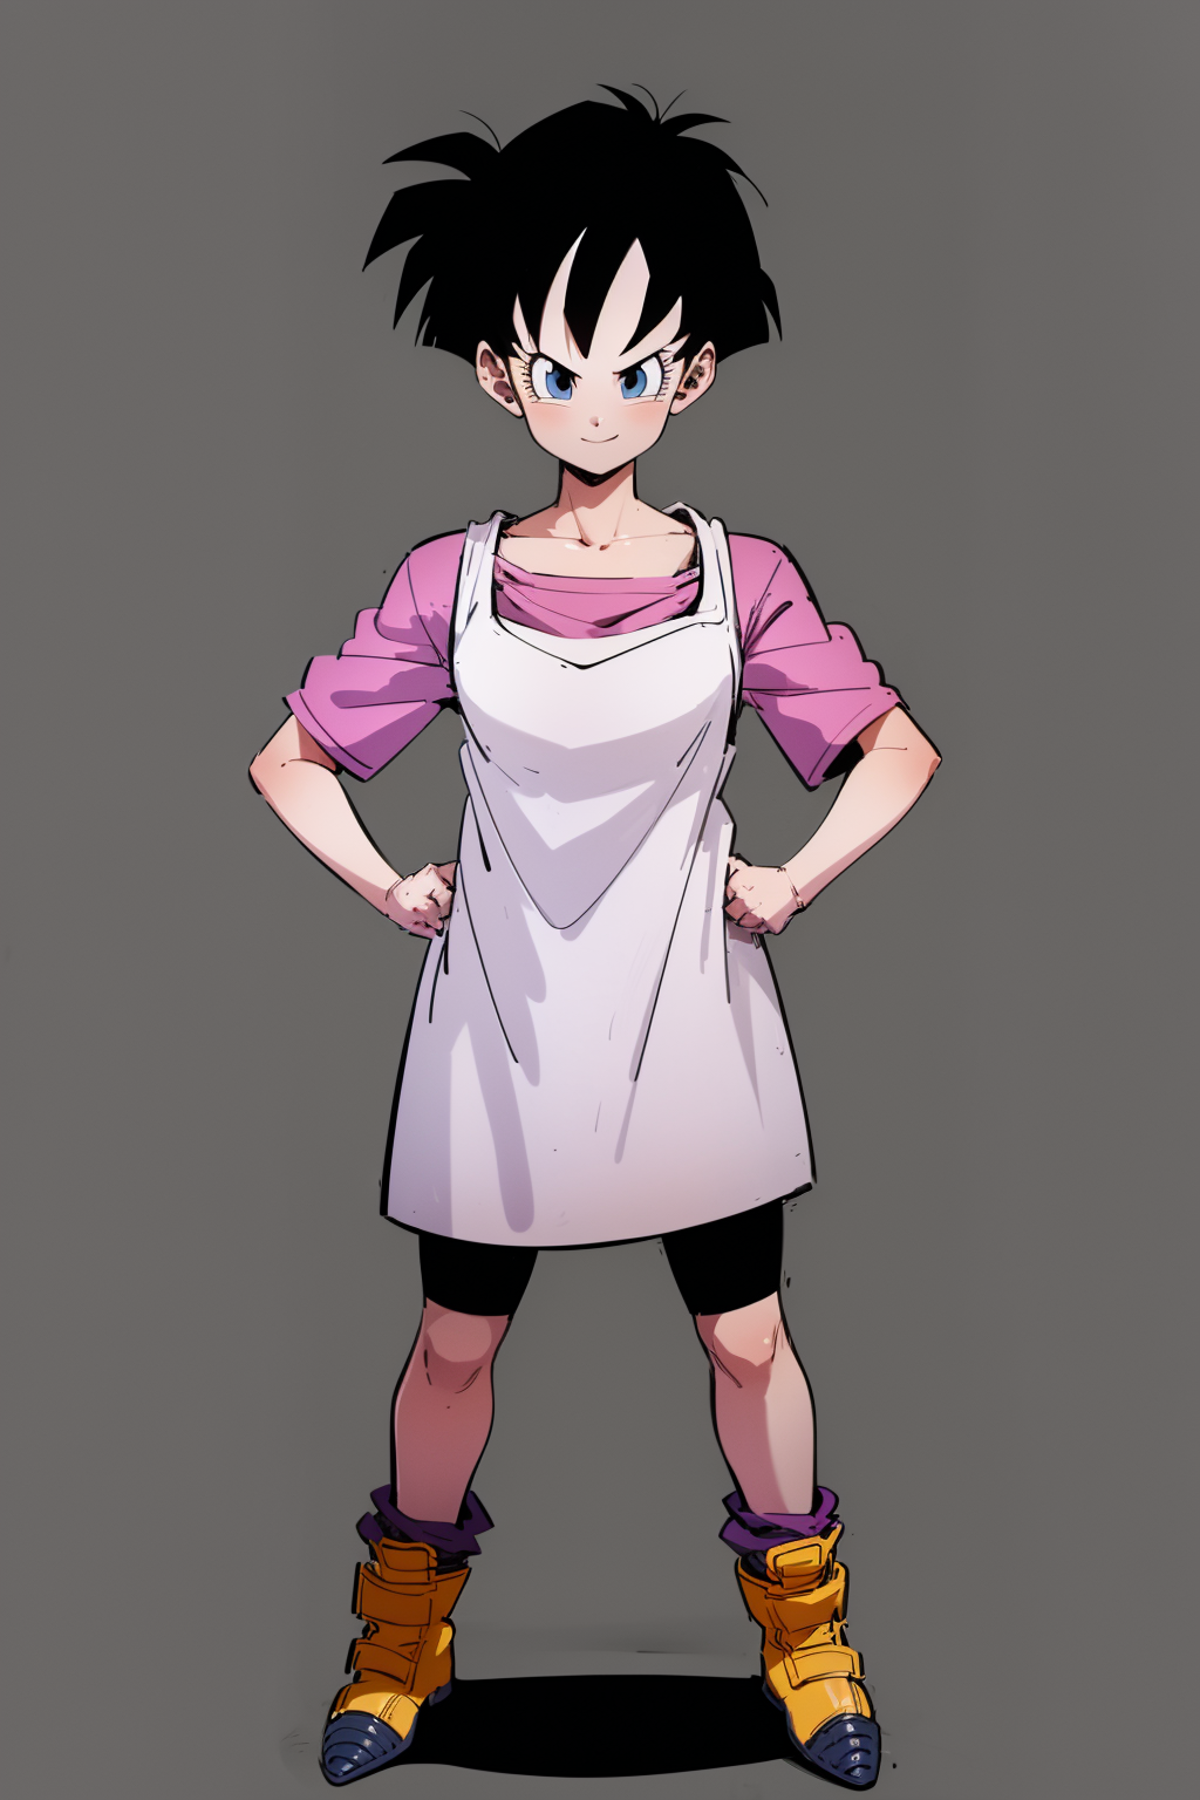 Pink Dressed Cartoon Character Posing with Fists Up